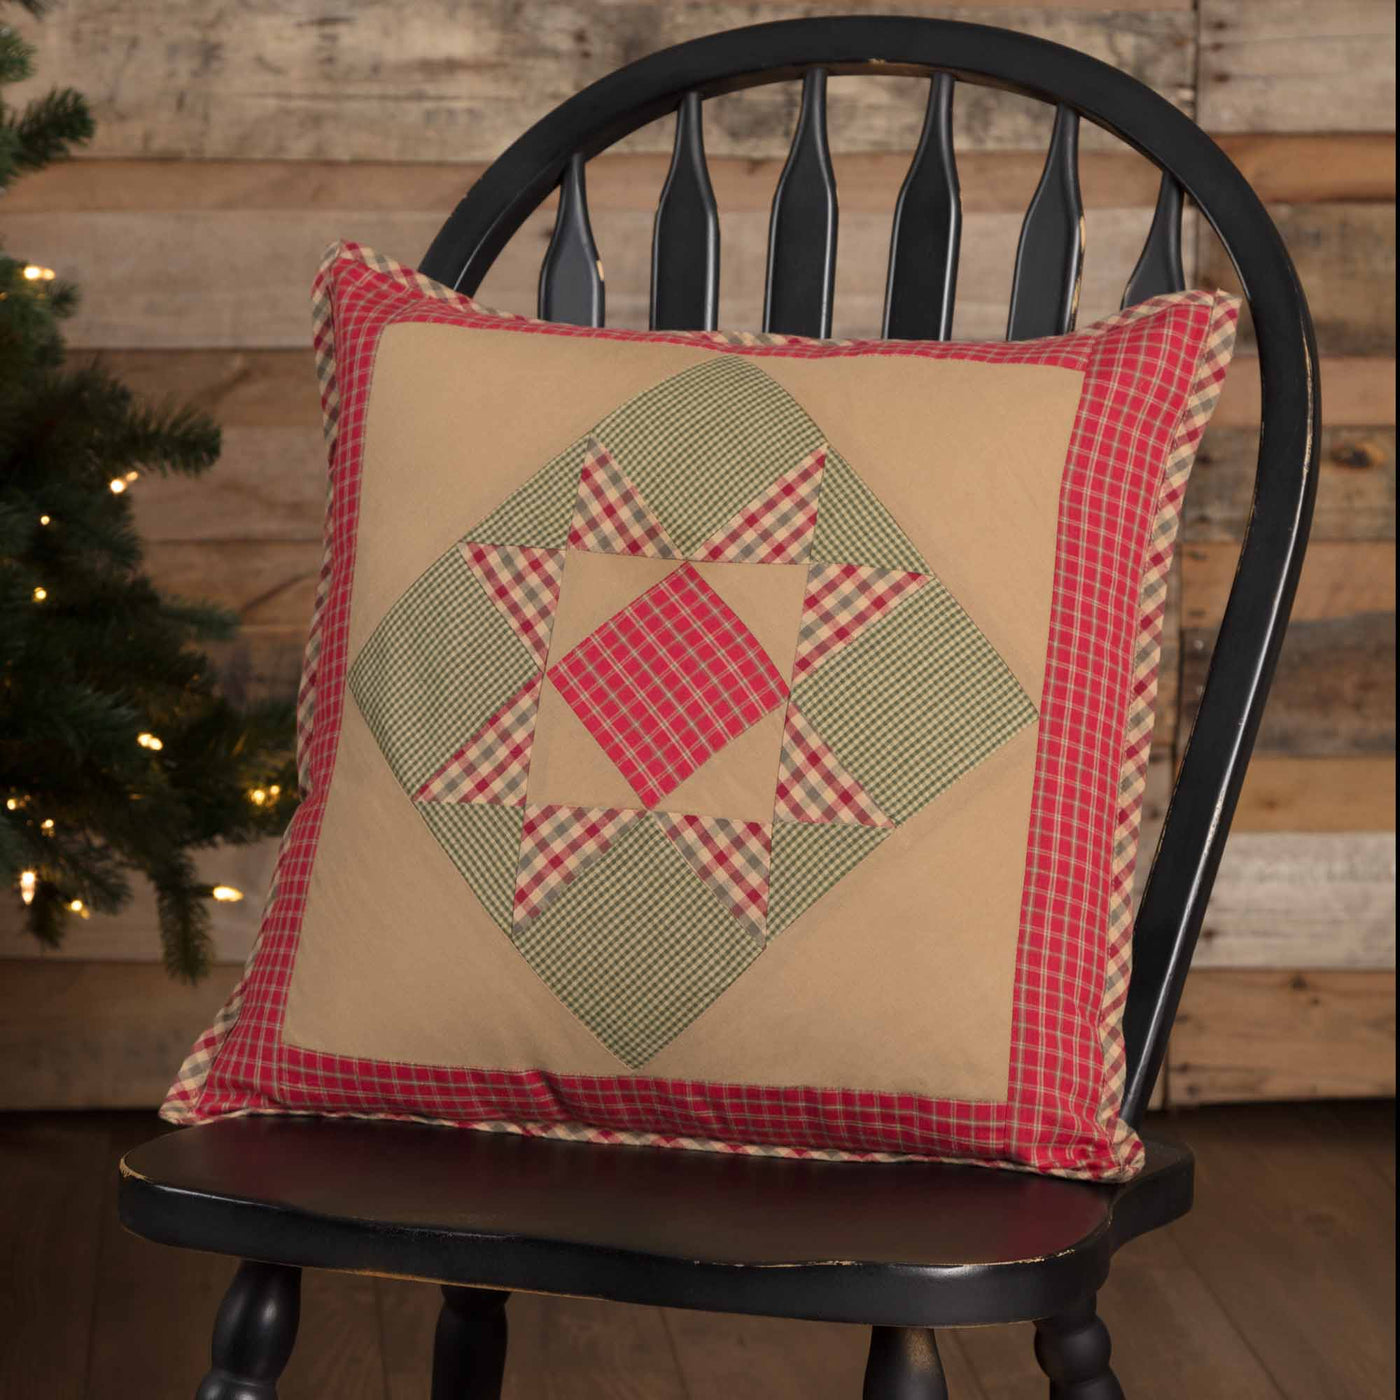 Dolly Star Patchwork 18" Red and Green Pillow